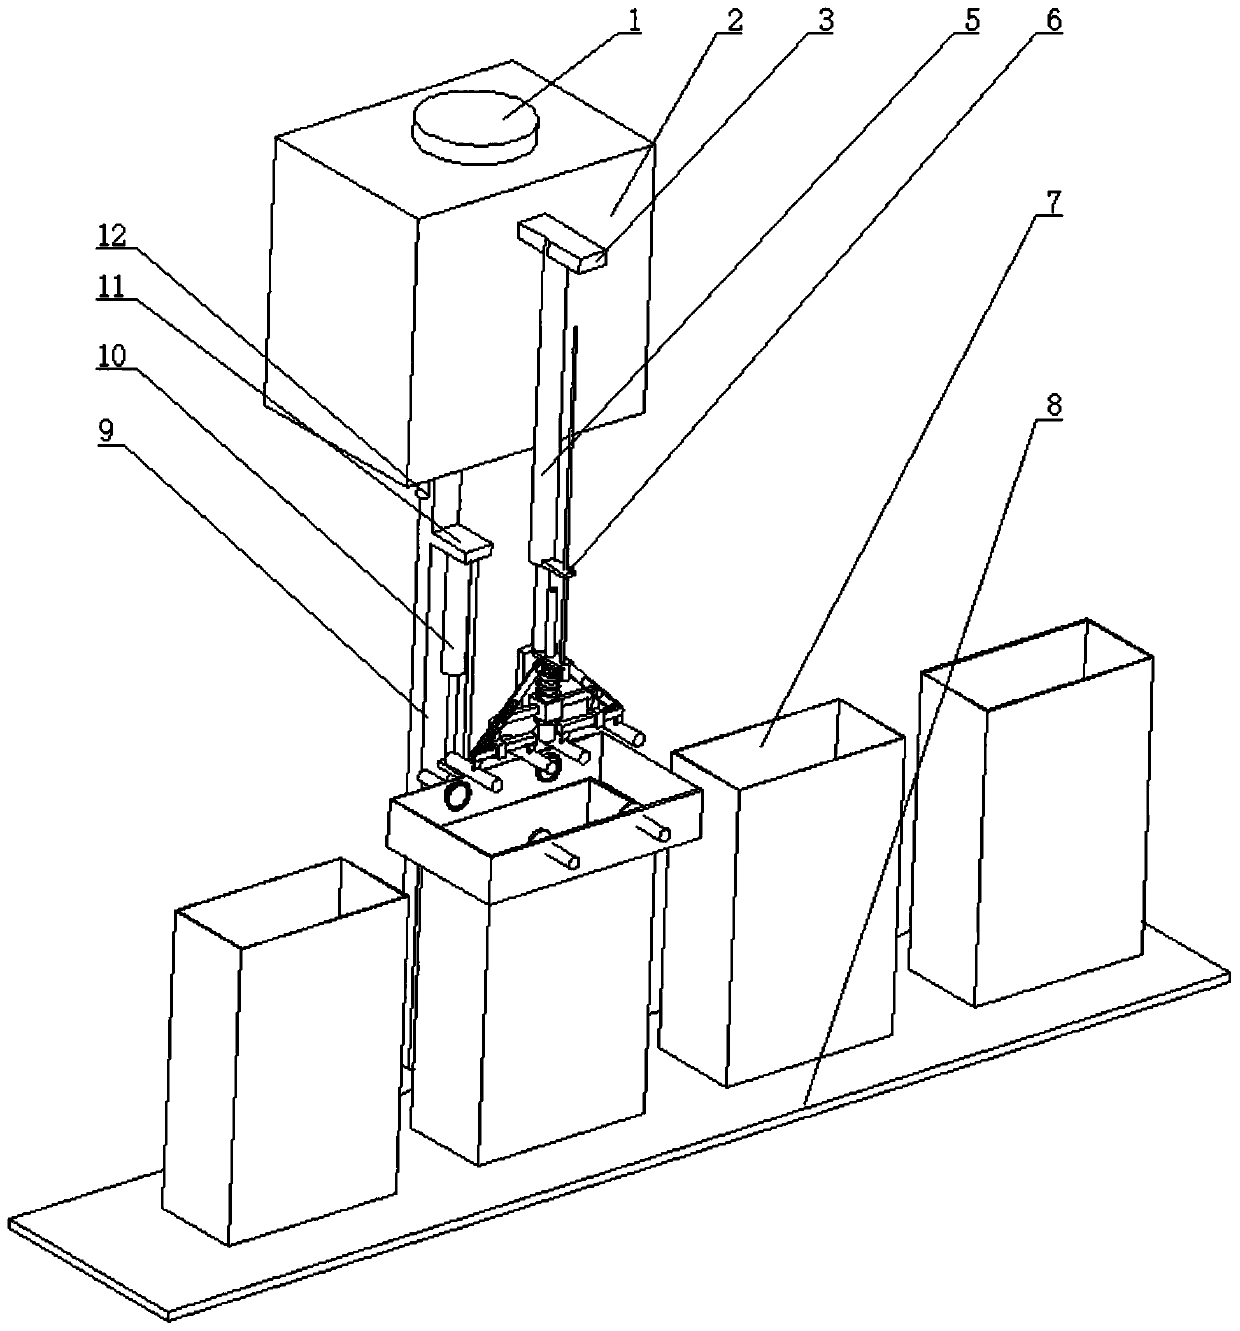 Rice processing device